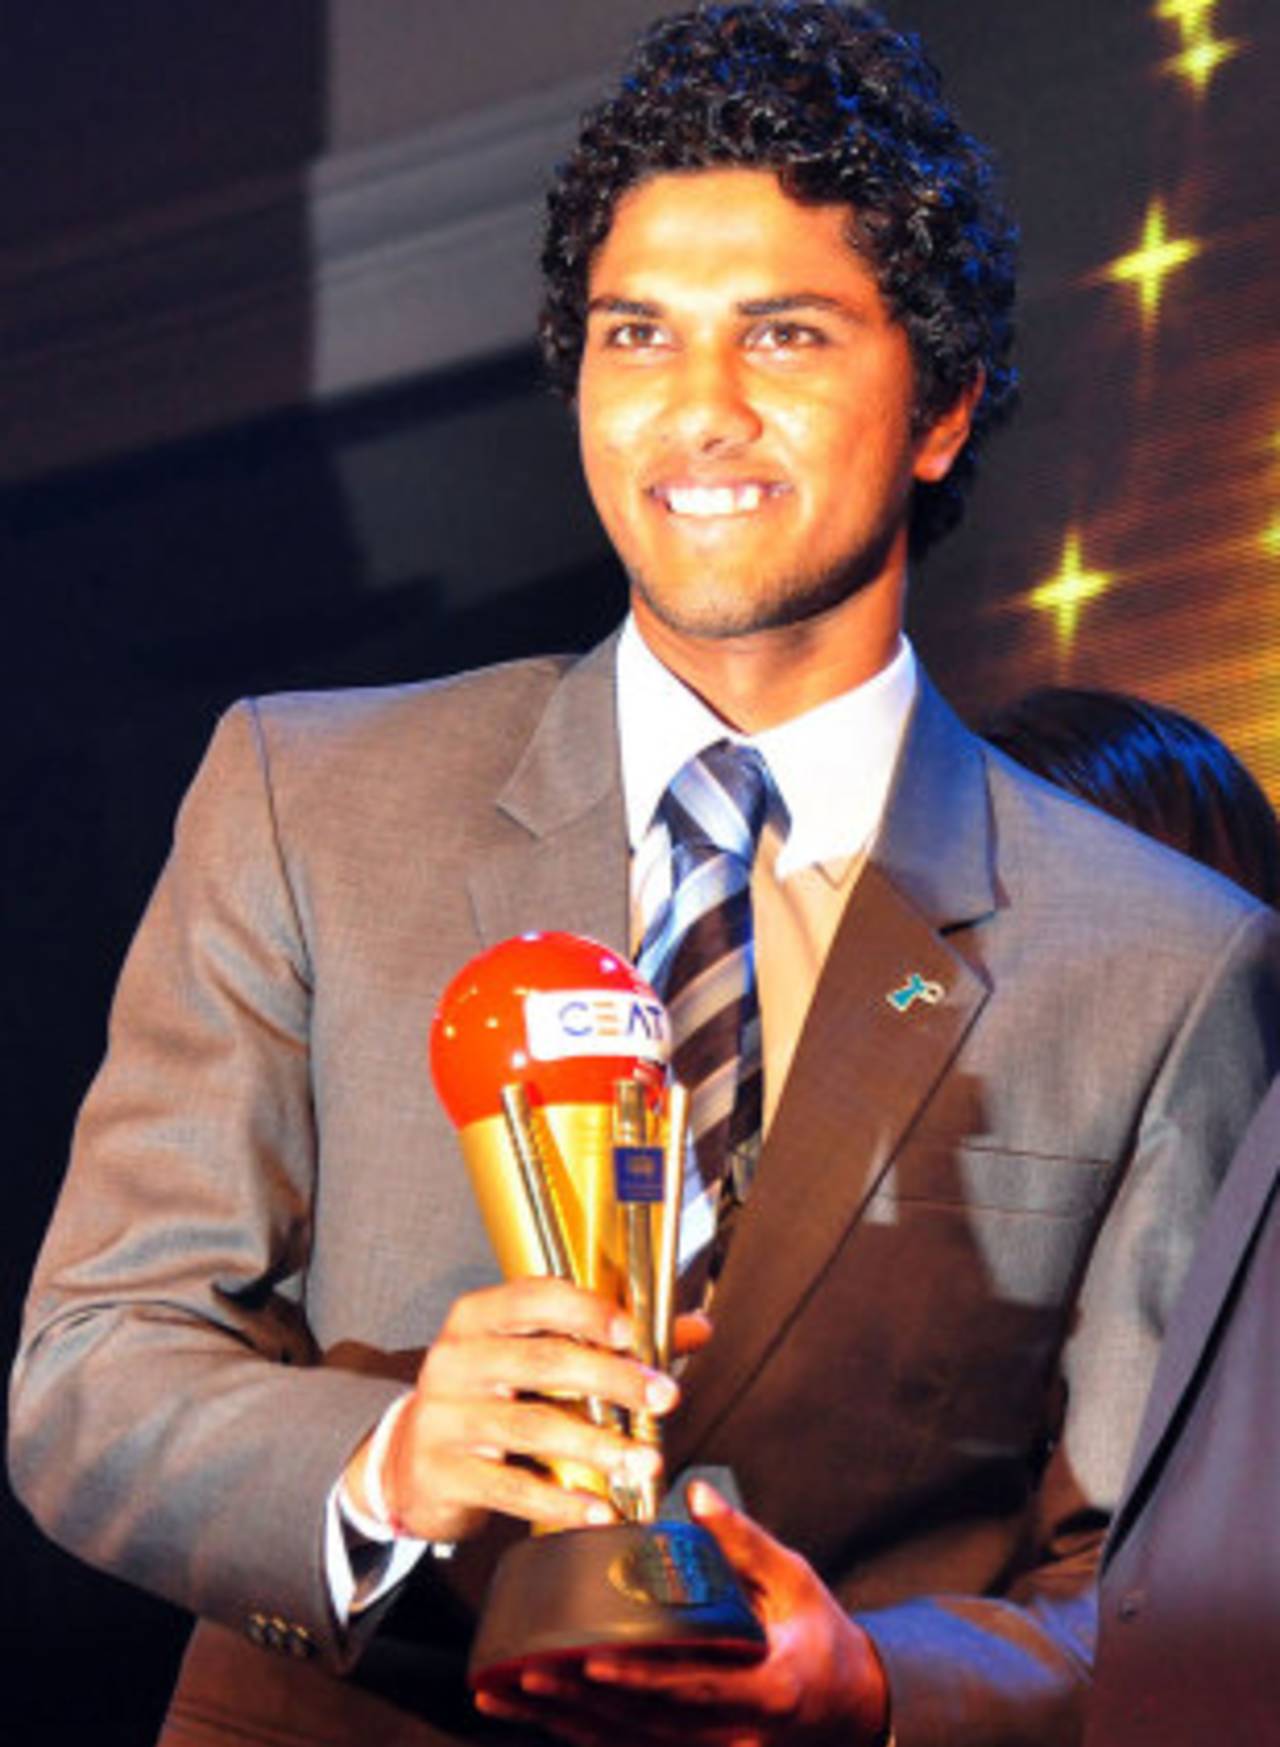 Dinesh Chandimal with the Emerging Player of the Year award, Colombo, September 5, 2012